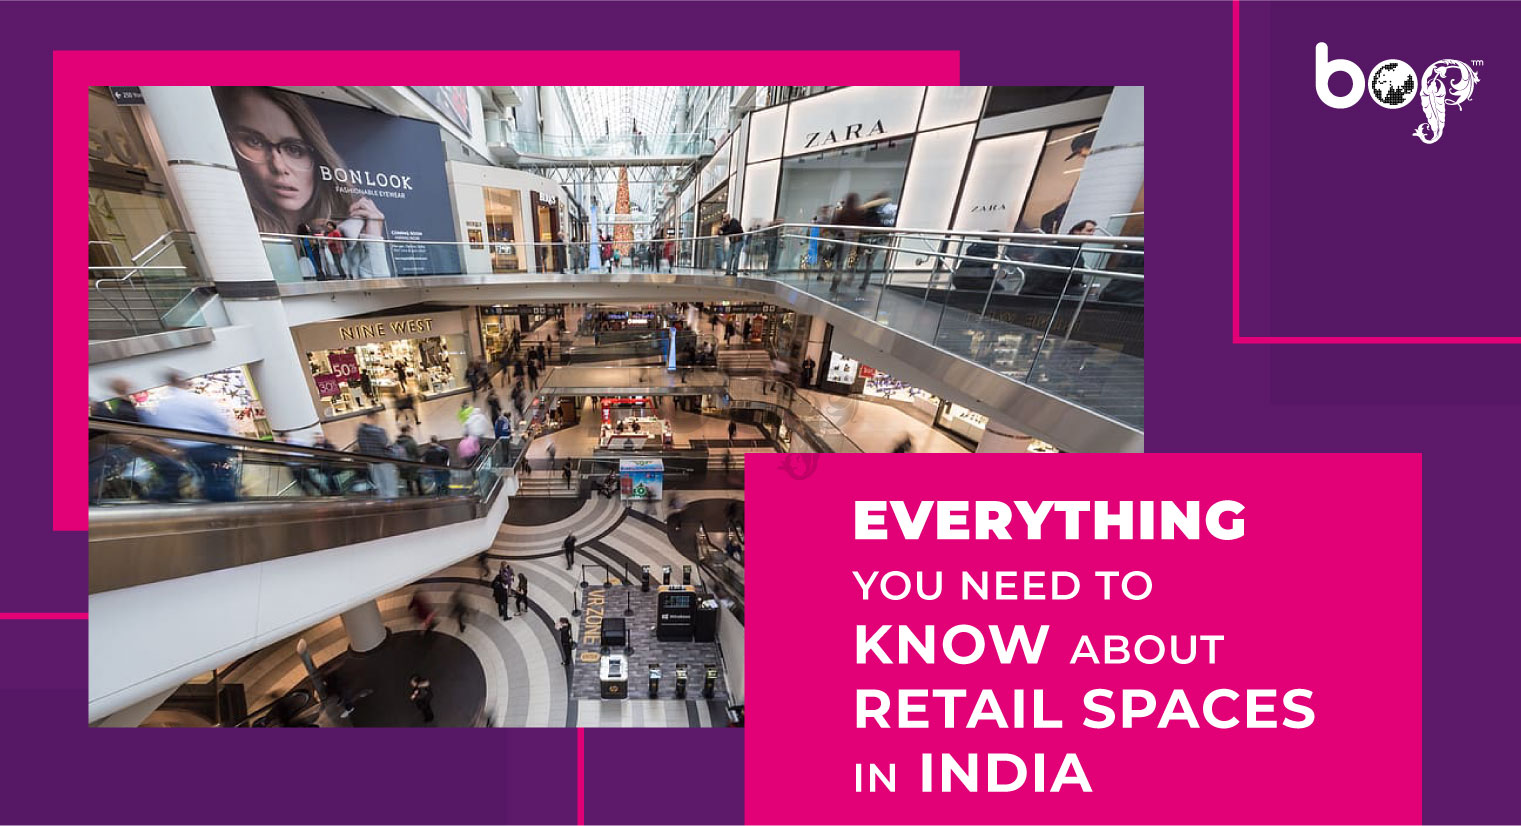 Everything You Need to Know About Retail Spaces in India